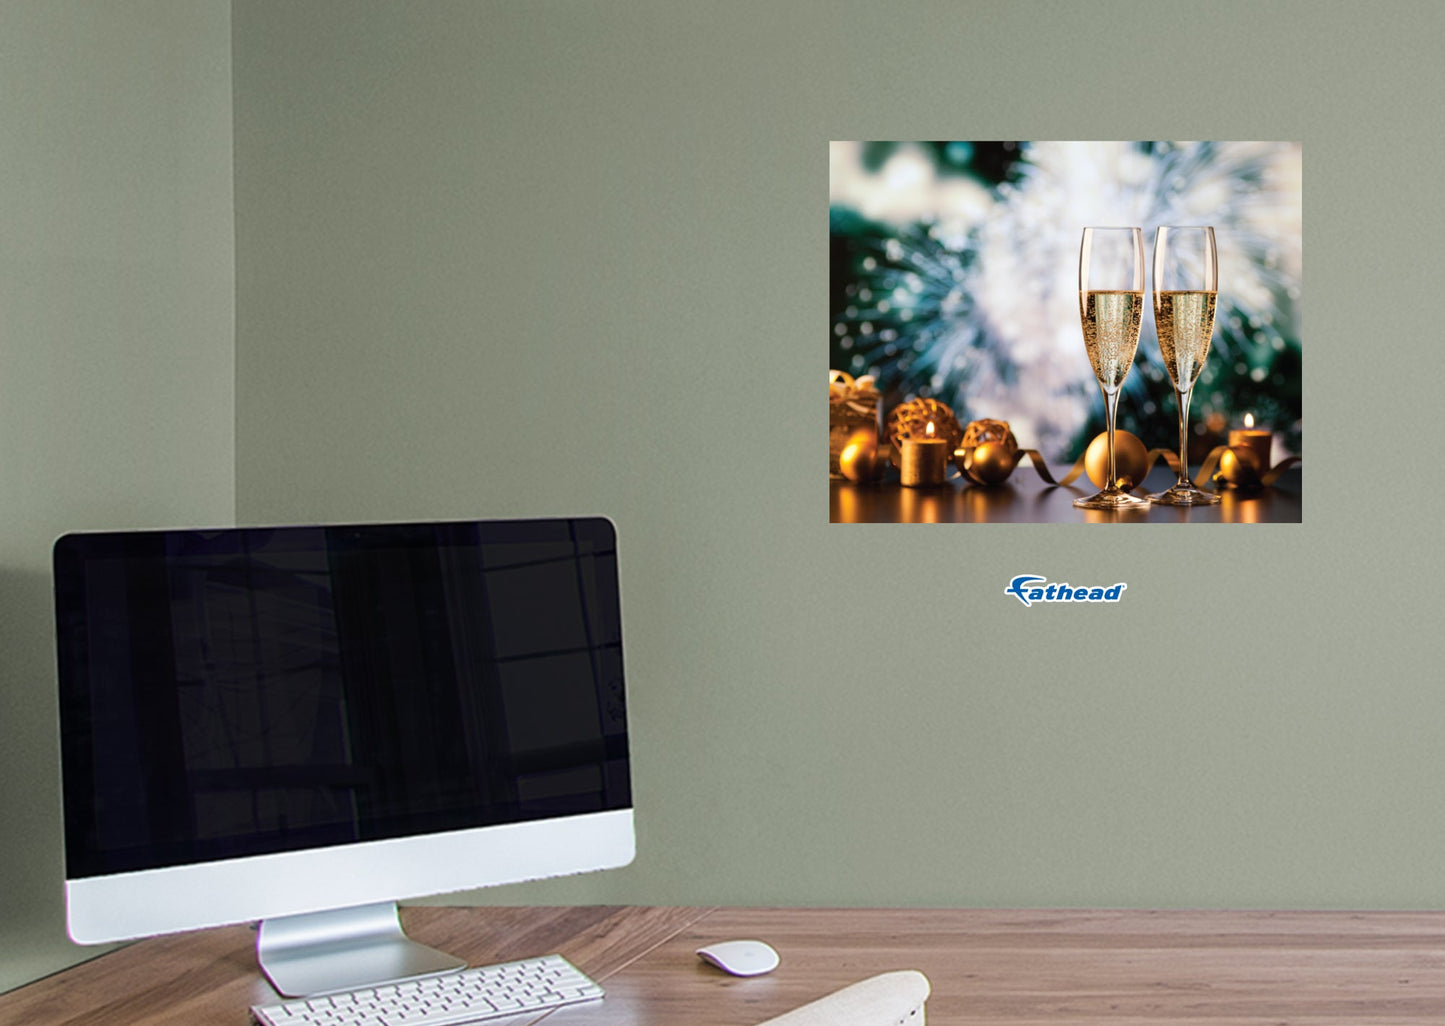 New Year: Champagne Glasses Poster - Removable Adhesive Decal